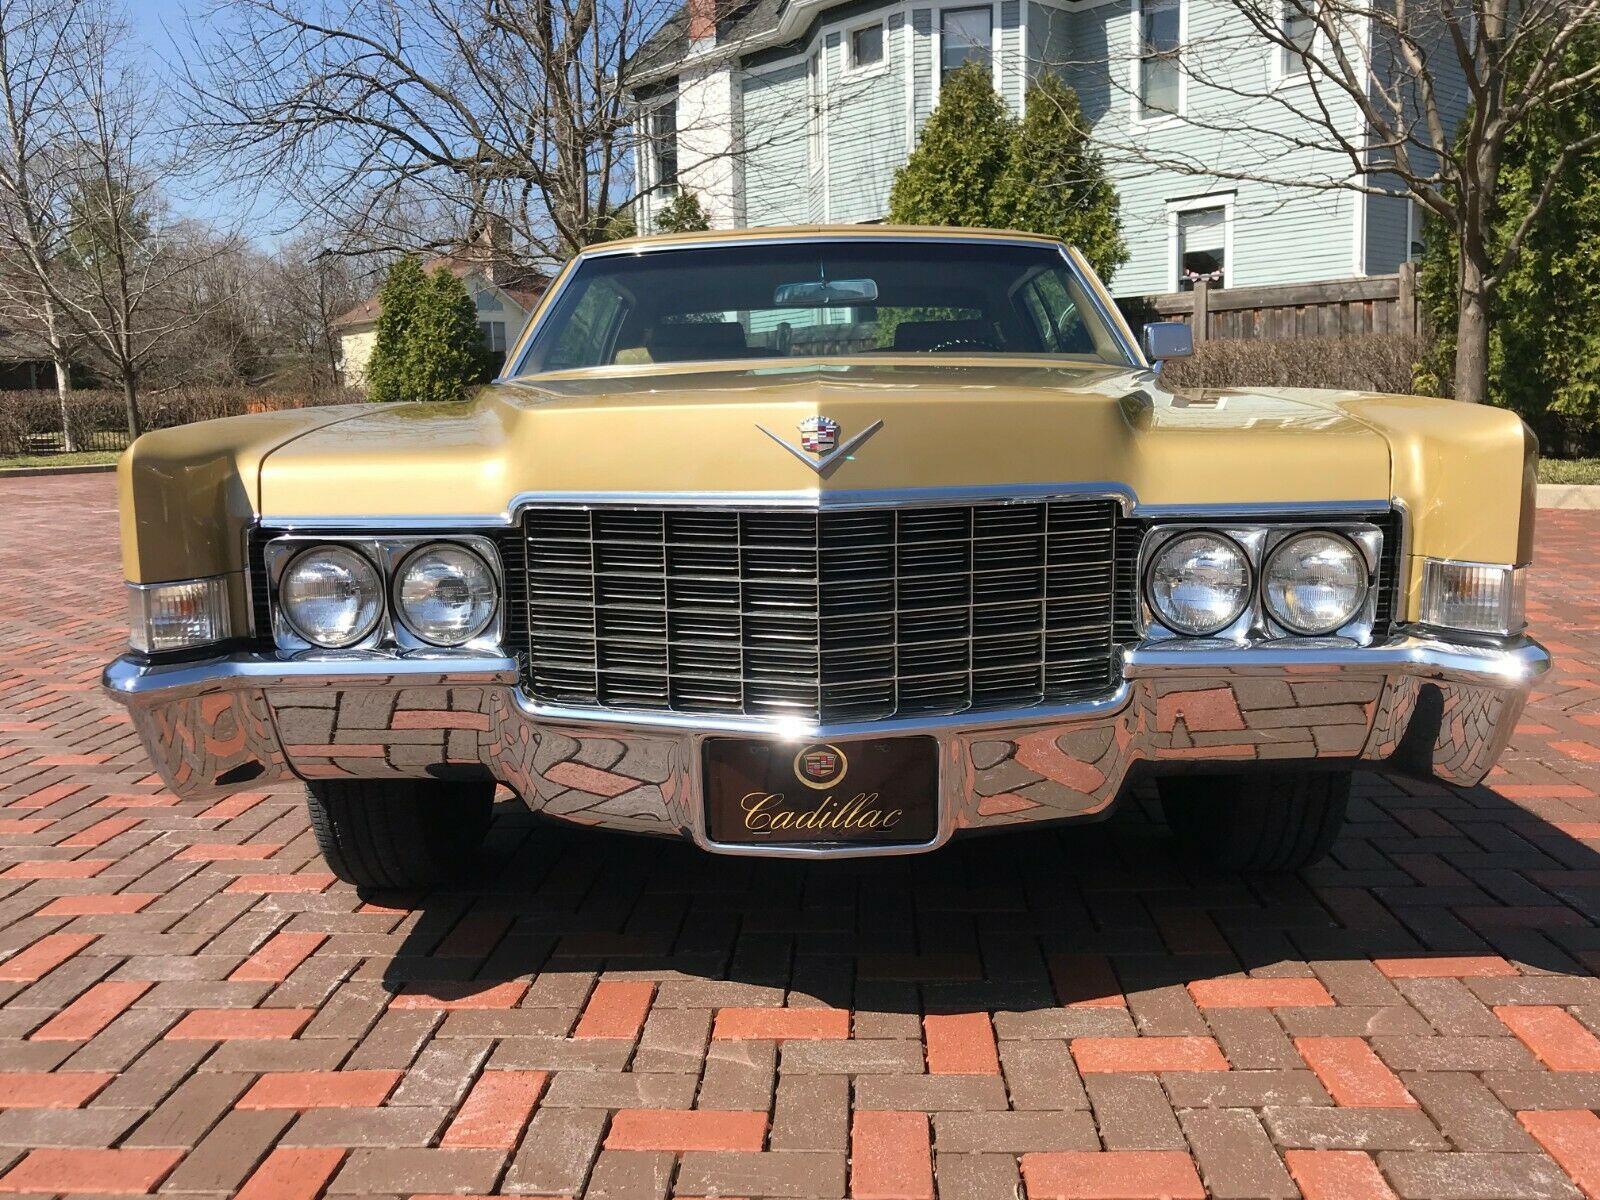 This 1969 Cadillac Coupe DeVille Looks Just Like a Brand-New 2020